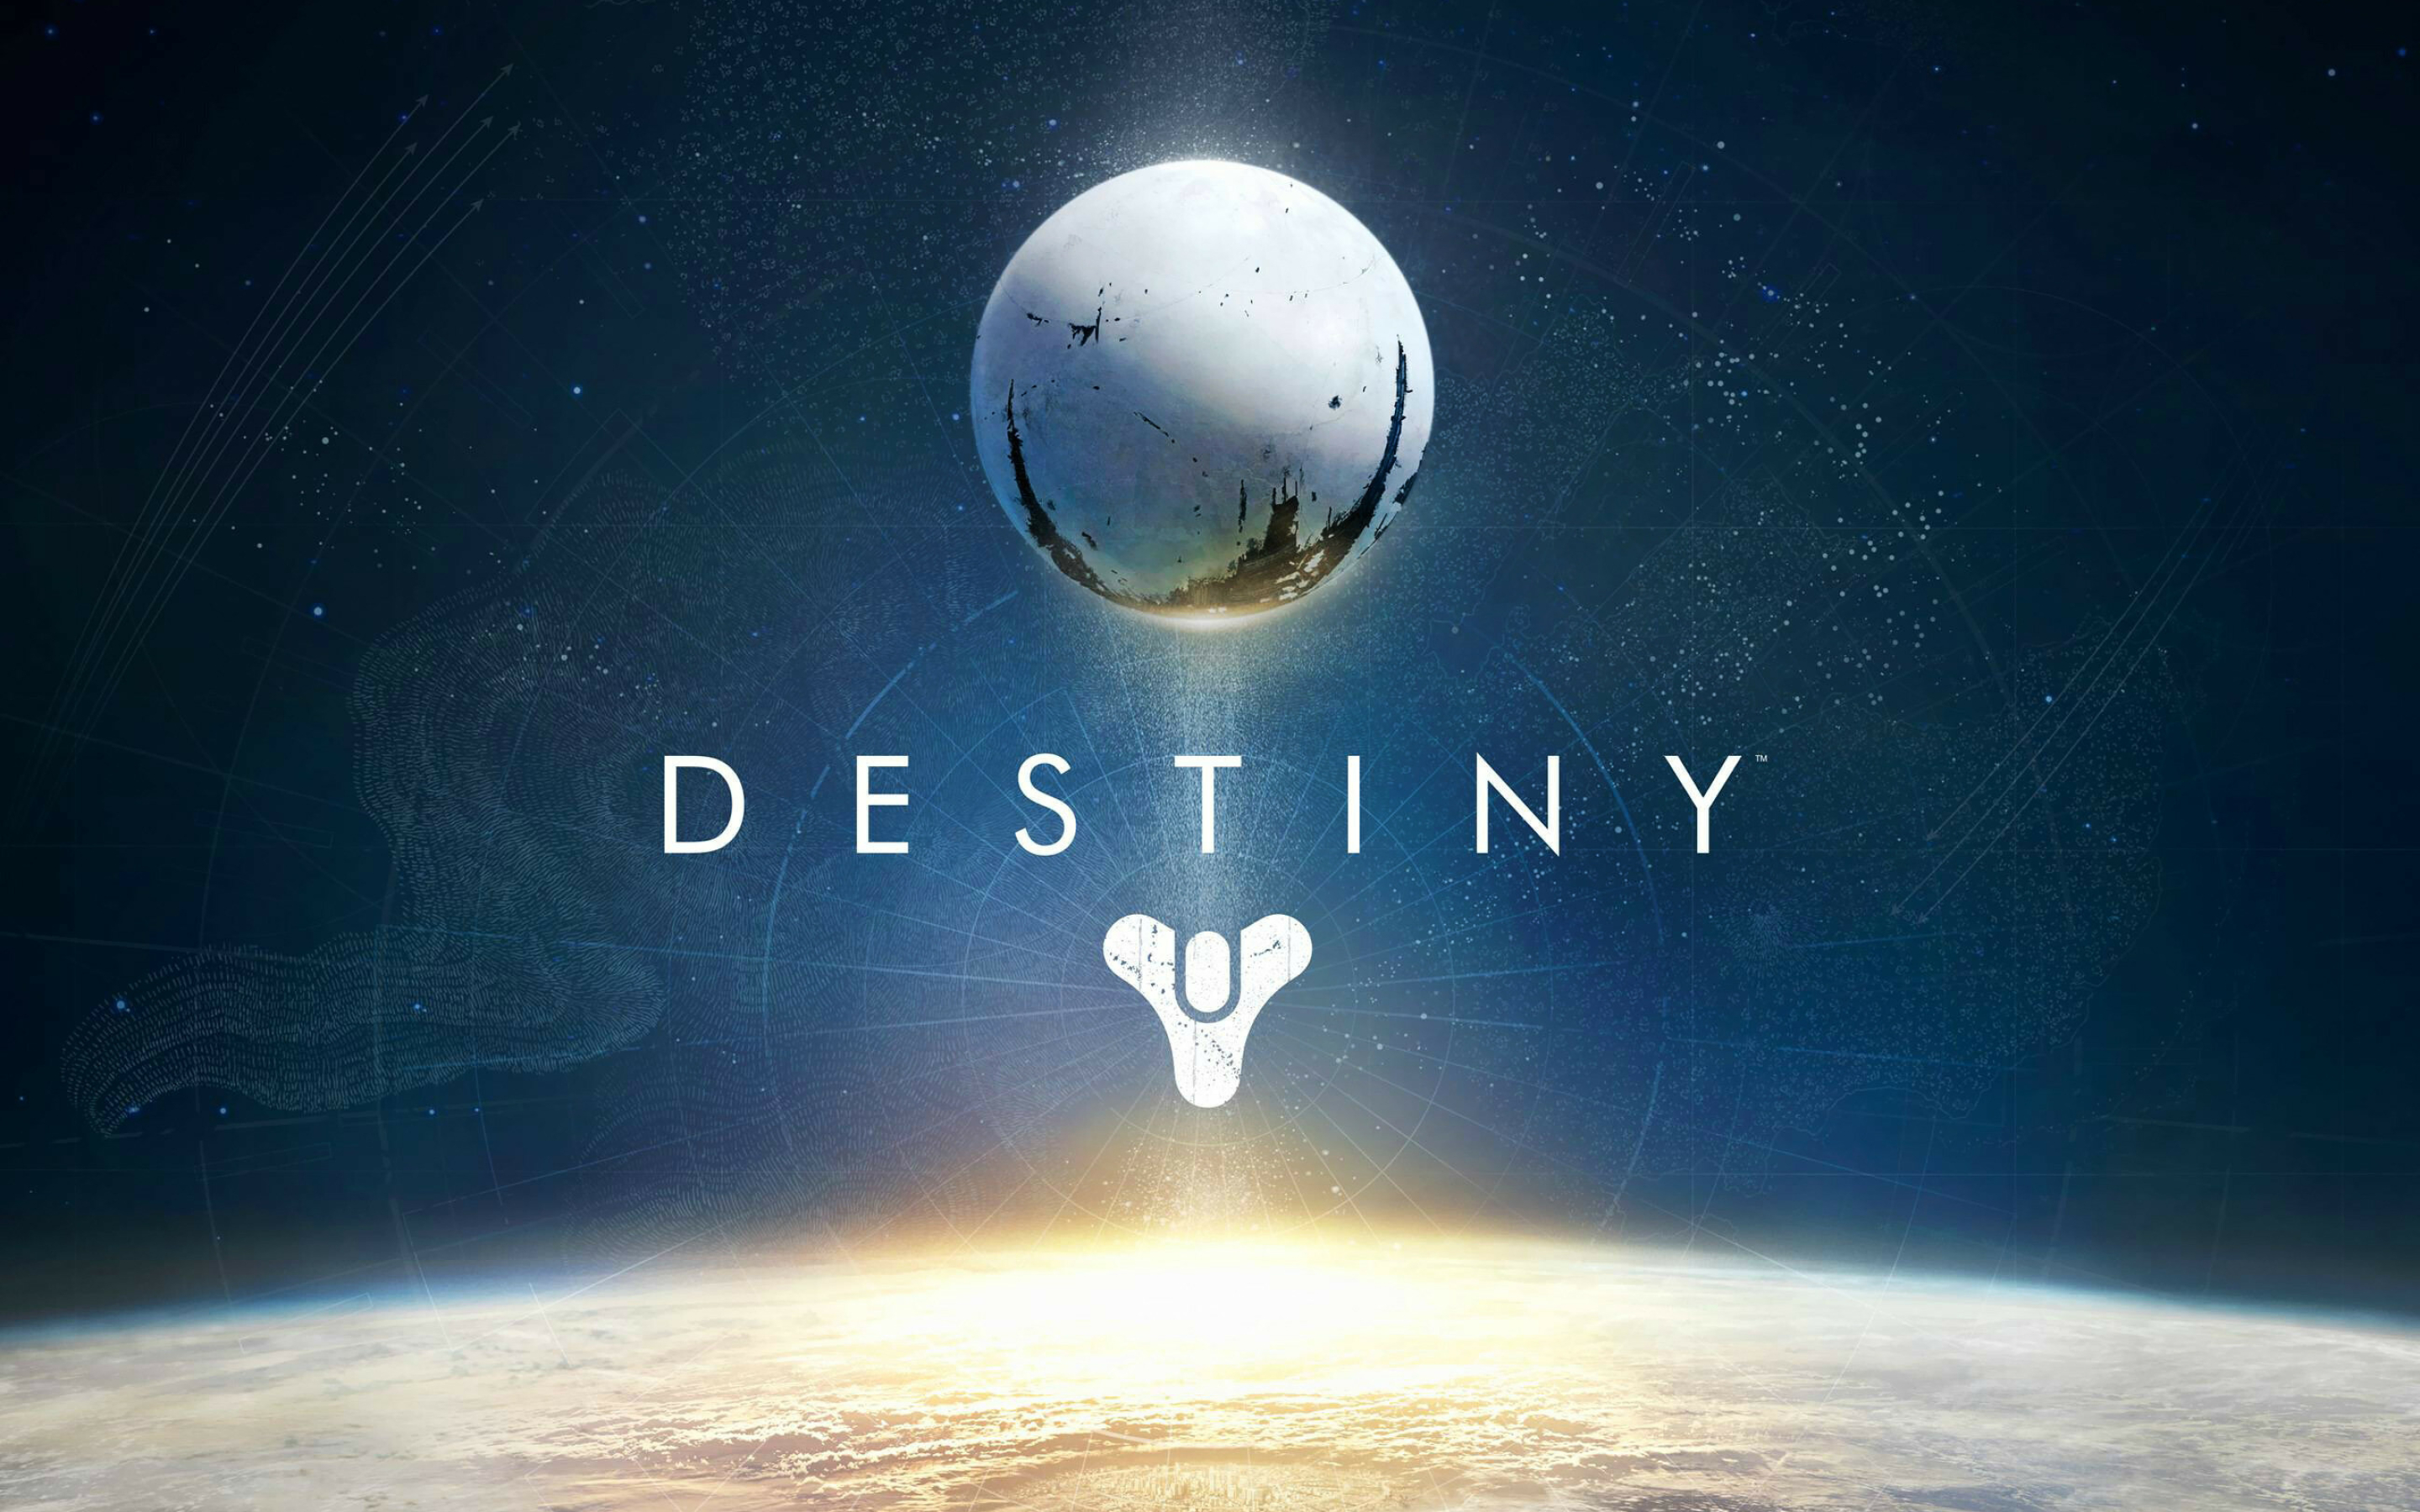 Destiny: It has been cited as one of the greatest video games ever made, Developed by Bungie. 2880x1800 HD Background.